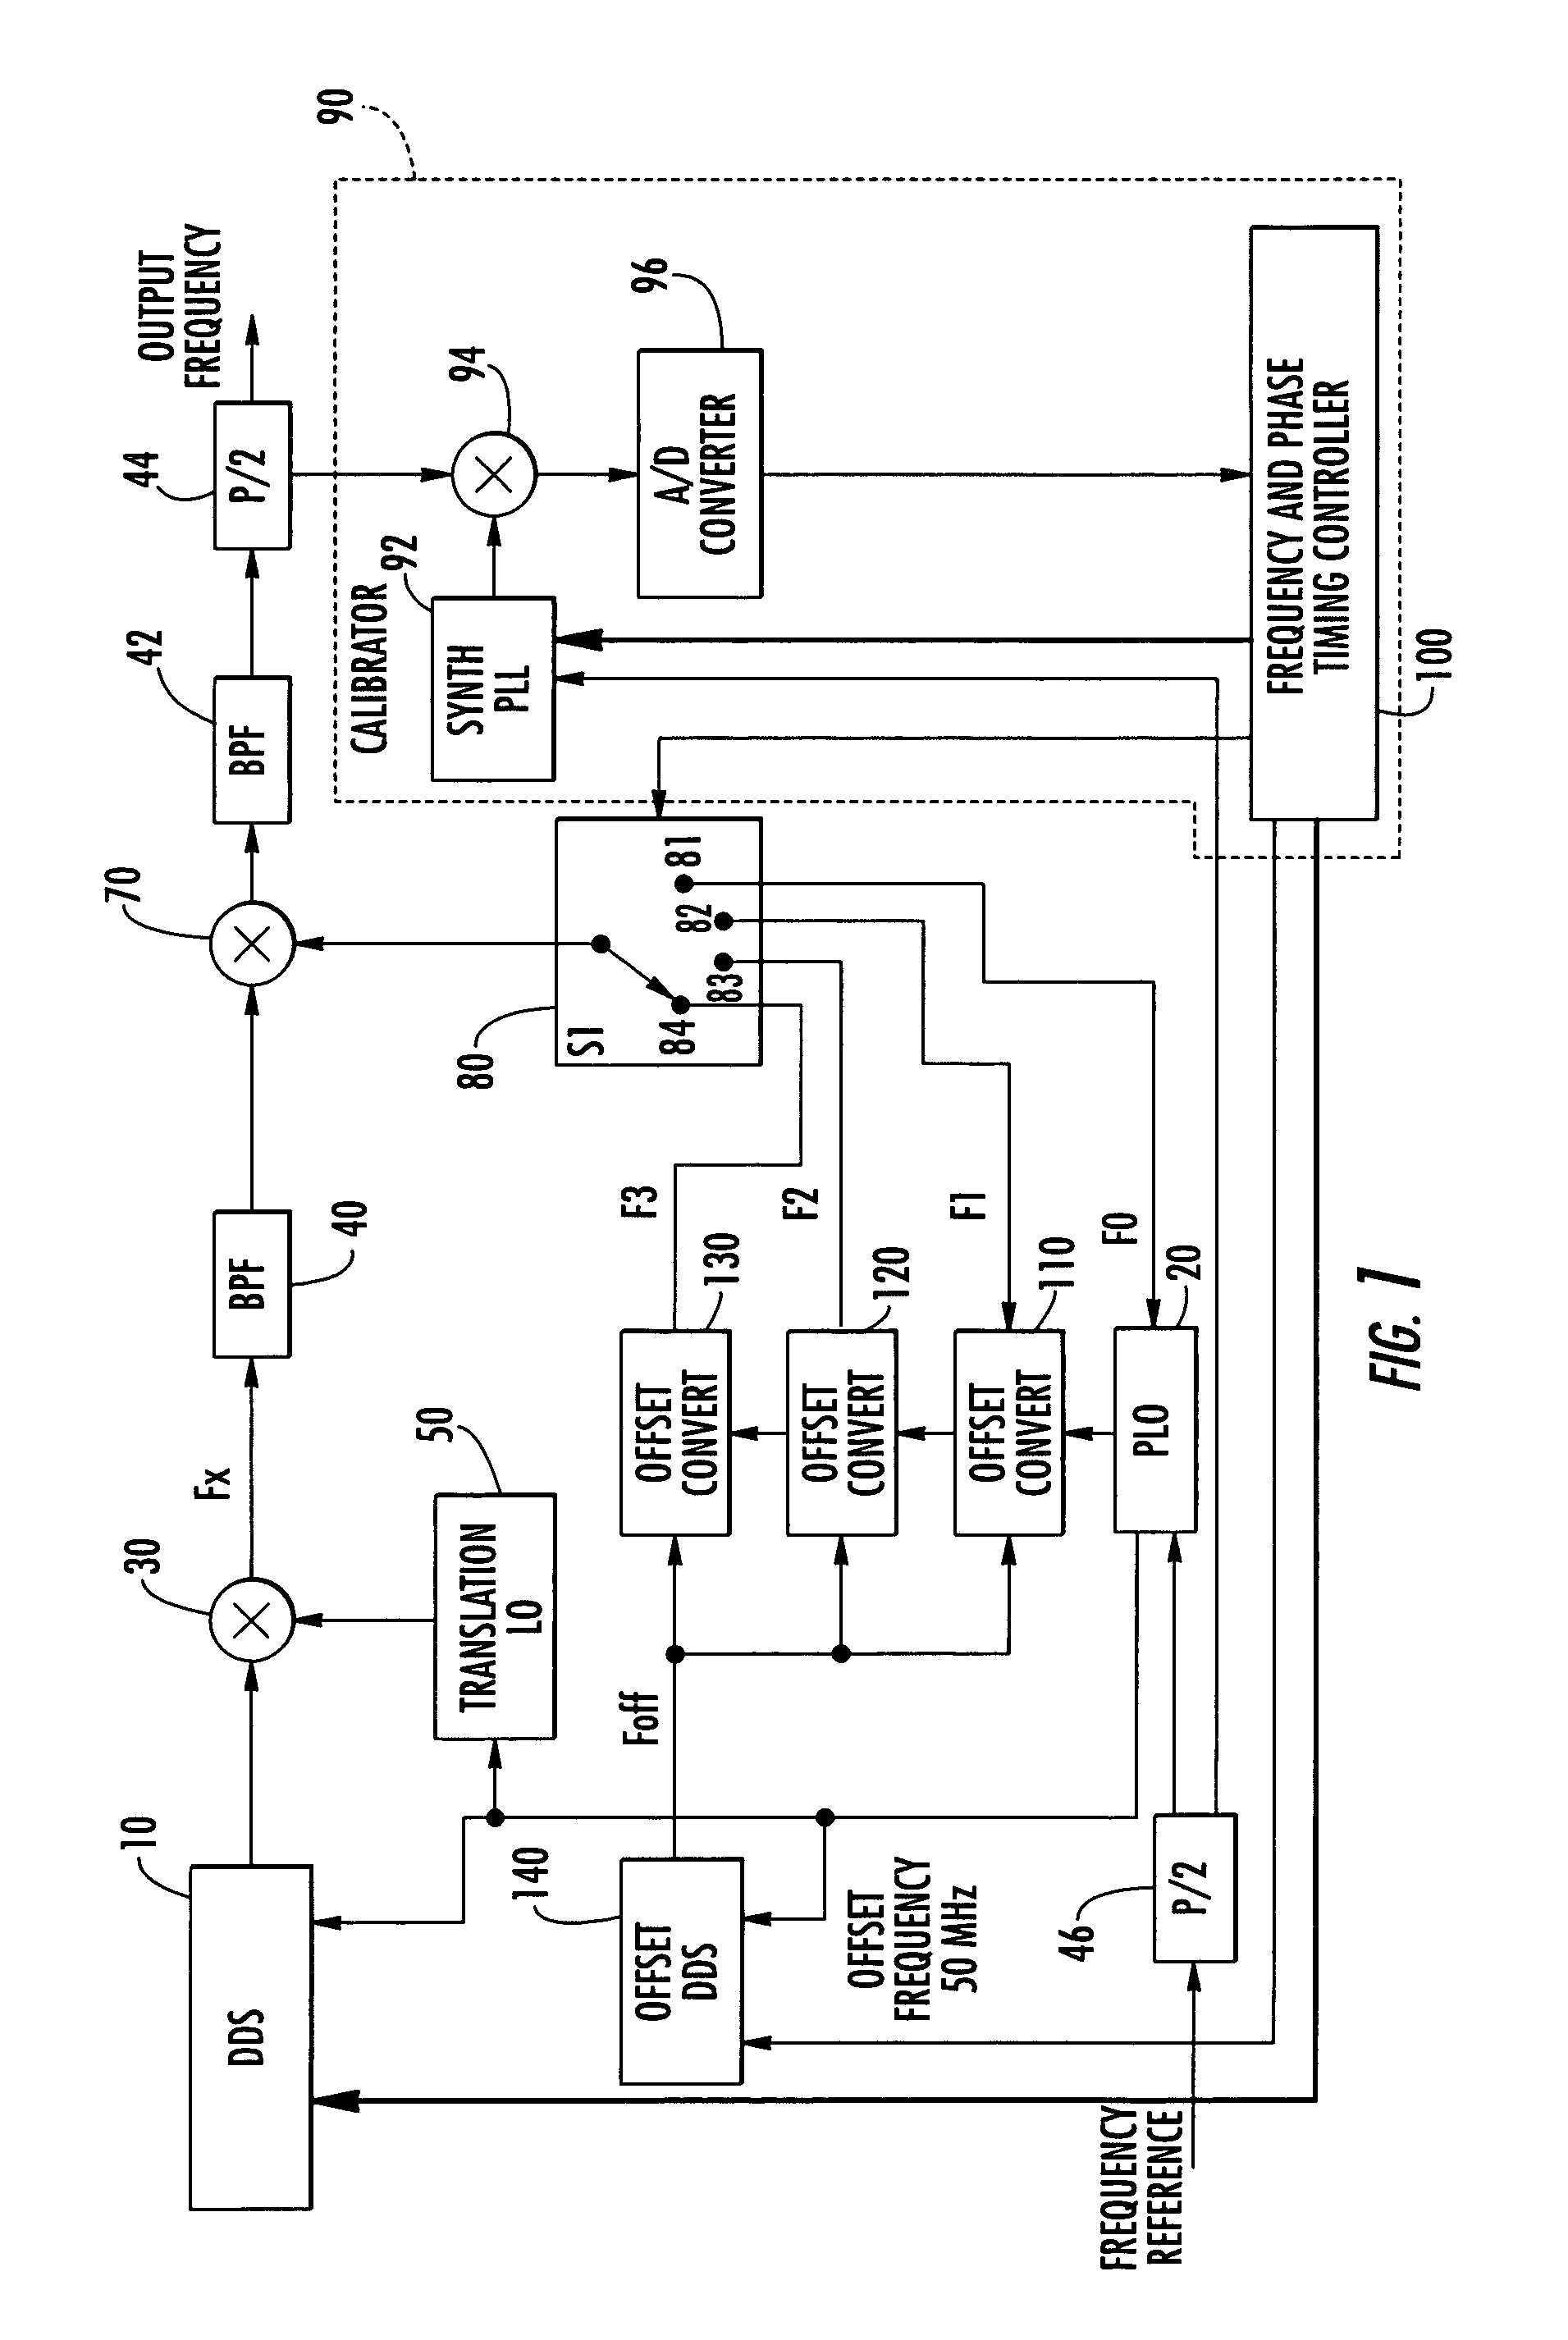 Self-calibrating wideband phase continuous synthesizer and associated methods